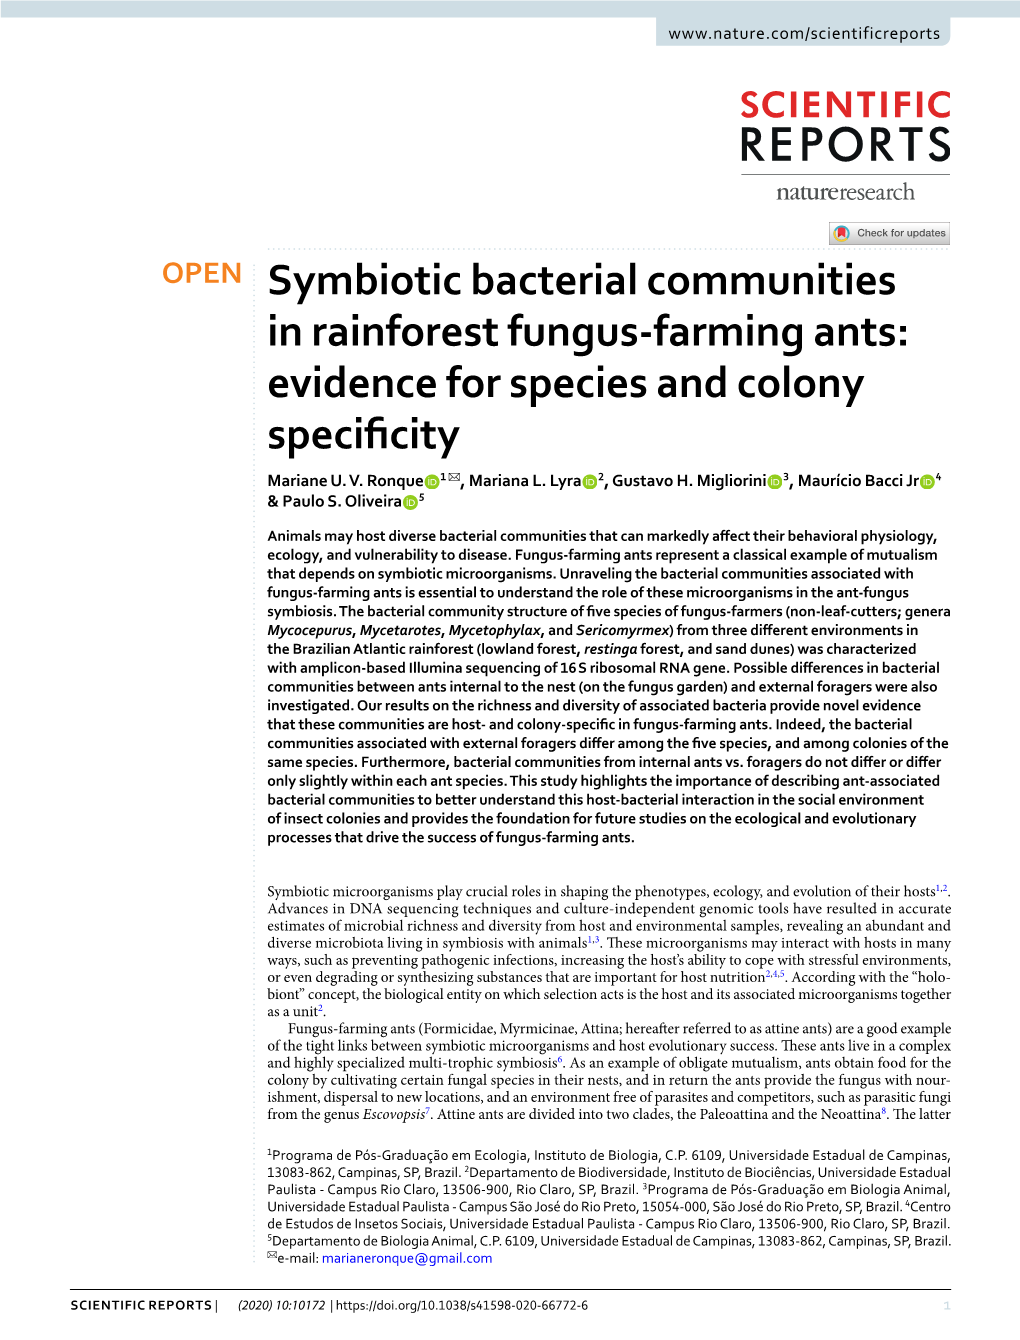 Symbiotic Bacterial Communities in Rainforest Fungus-Farming Ants: Evidence for Species and Colony Specifcity Mariane U